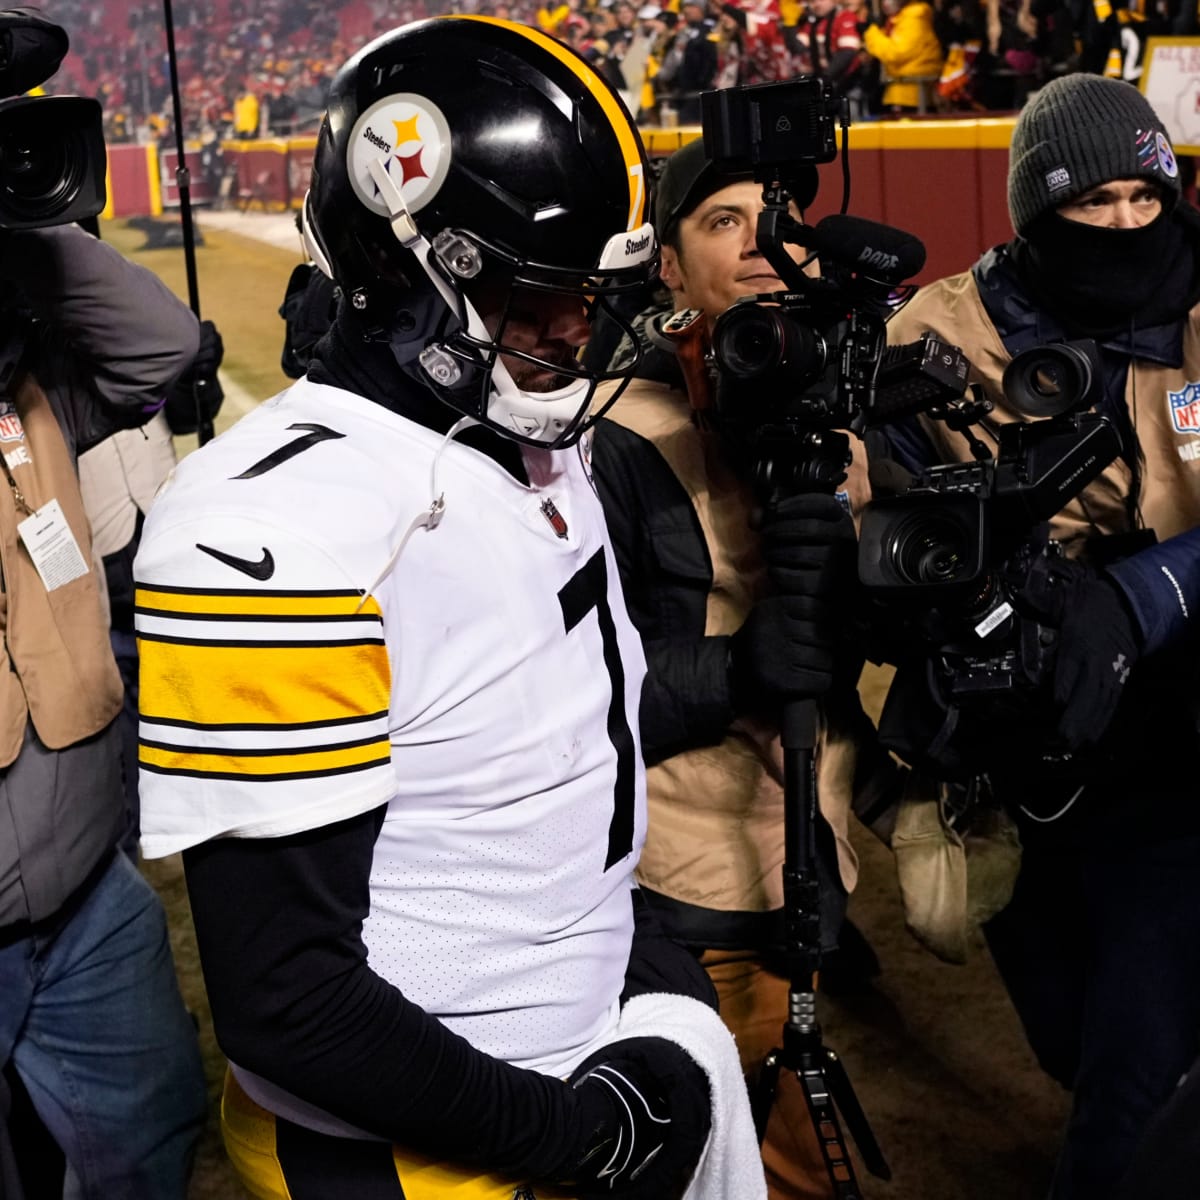 Ben Roethlisberger reflects on season, career after likely last